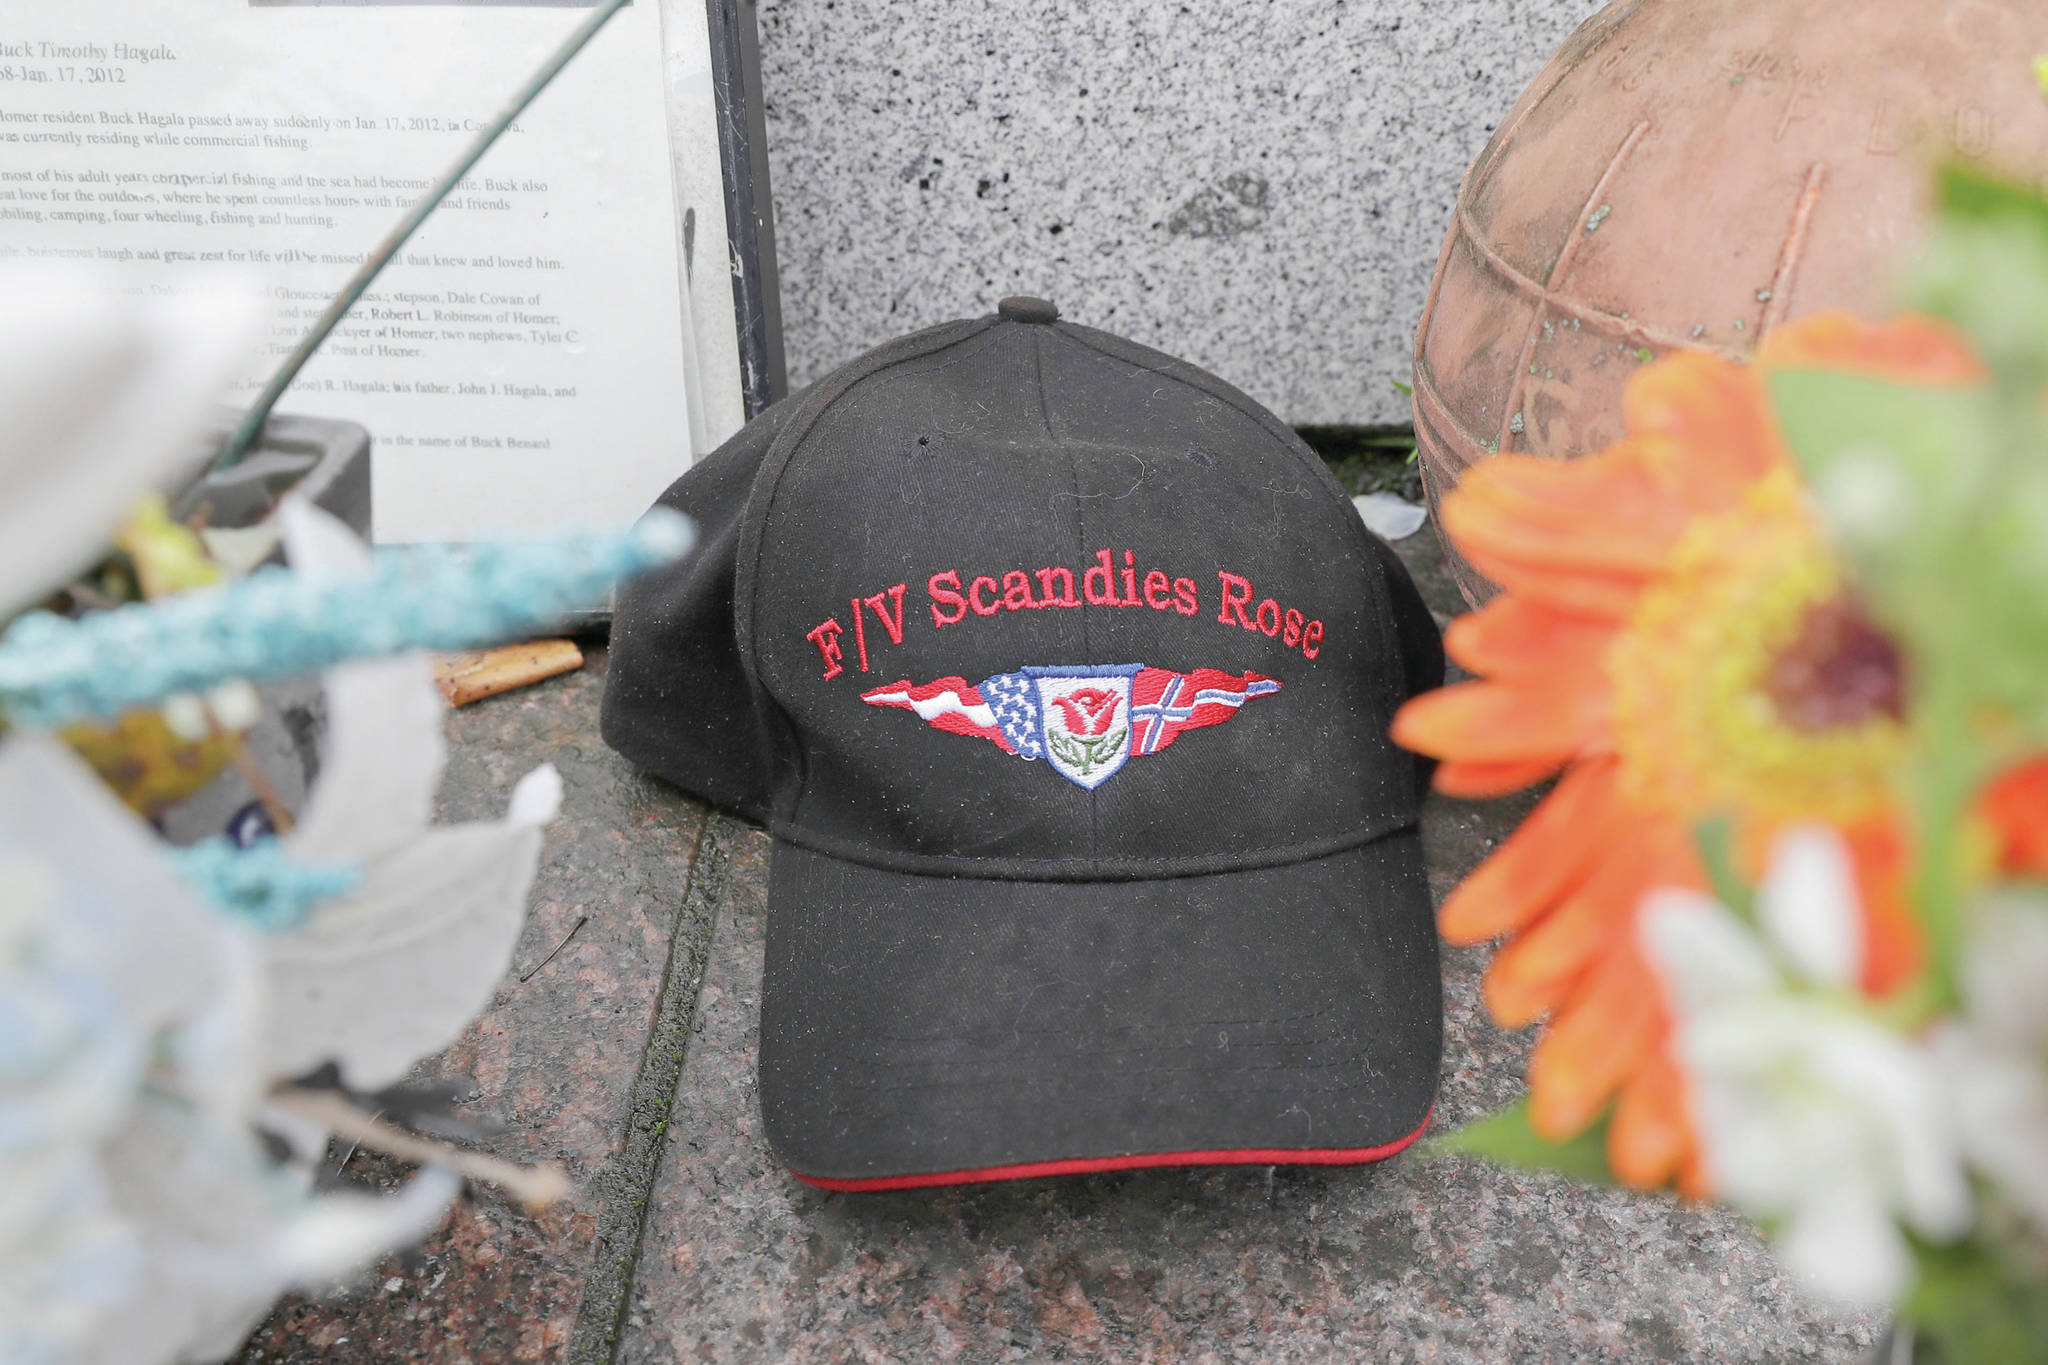 Ted S. Warren / Associated Press                                A ball cap with the name of the crab fishing boat Scandies Rose rests at the Seattle Fishermen’s Memorial on Thursday in Seattle. The search for five crew members of the Scandies Rose in Alaska has been suspended, the U.S. Coast Guard said after two other crew members of the vessel were rescued after the 130-foot crab fishing boat from Dutch Harbor sank on New Year’s Eve.